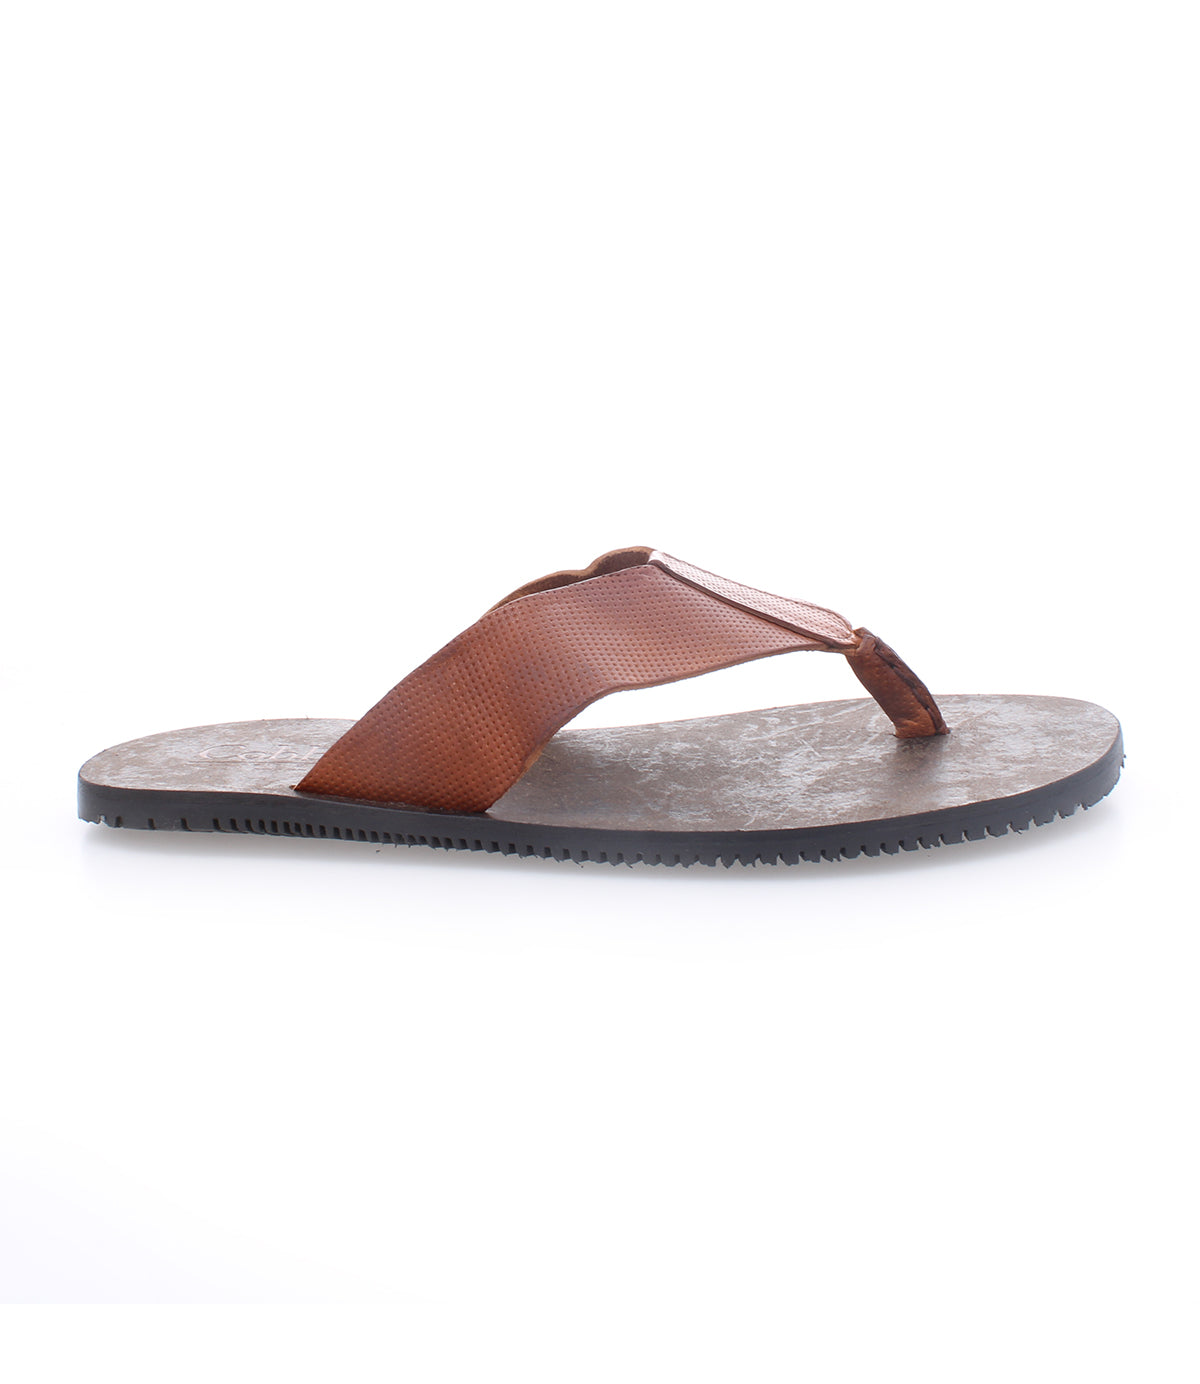 An Introduce men's brown leather flip flop by Bed Stu with durability and comfort.